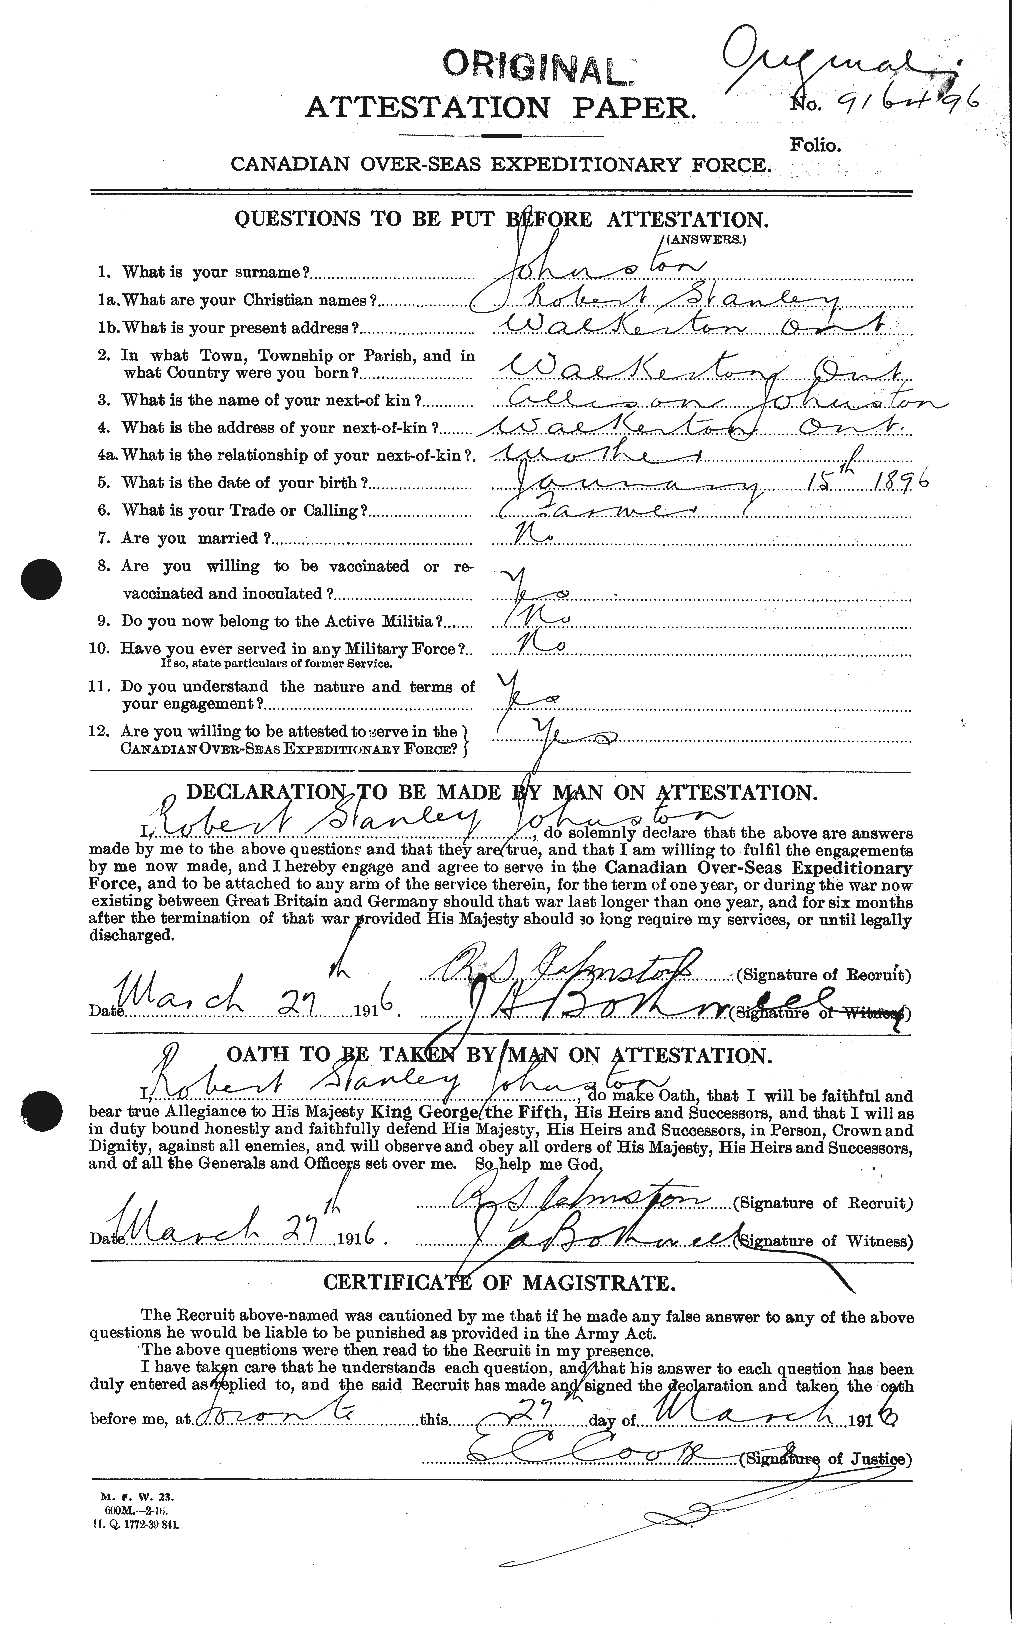 Personnel Records of the First World War - CEF 427038a